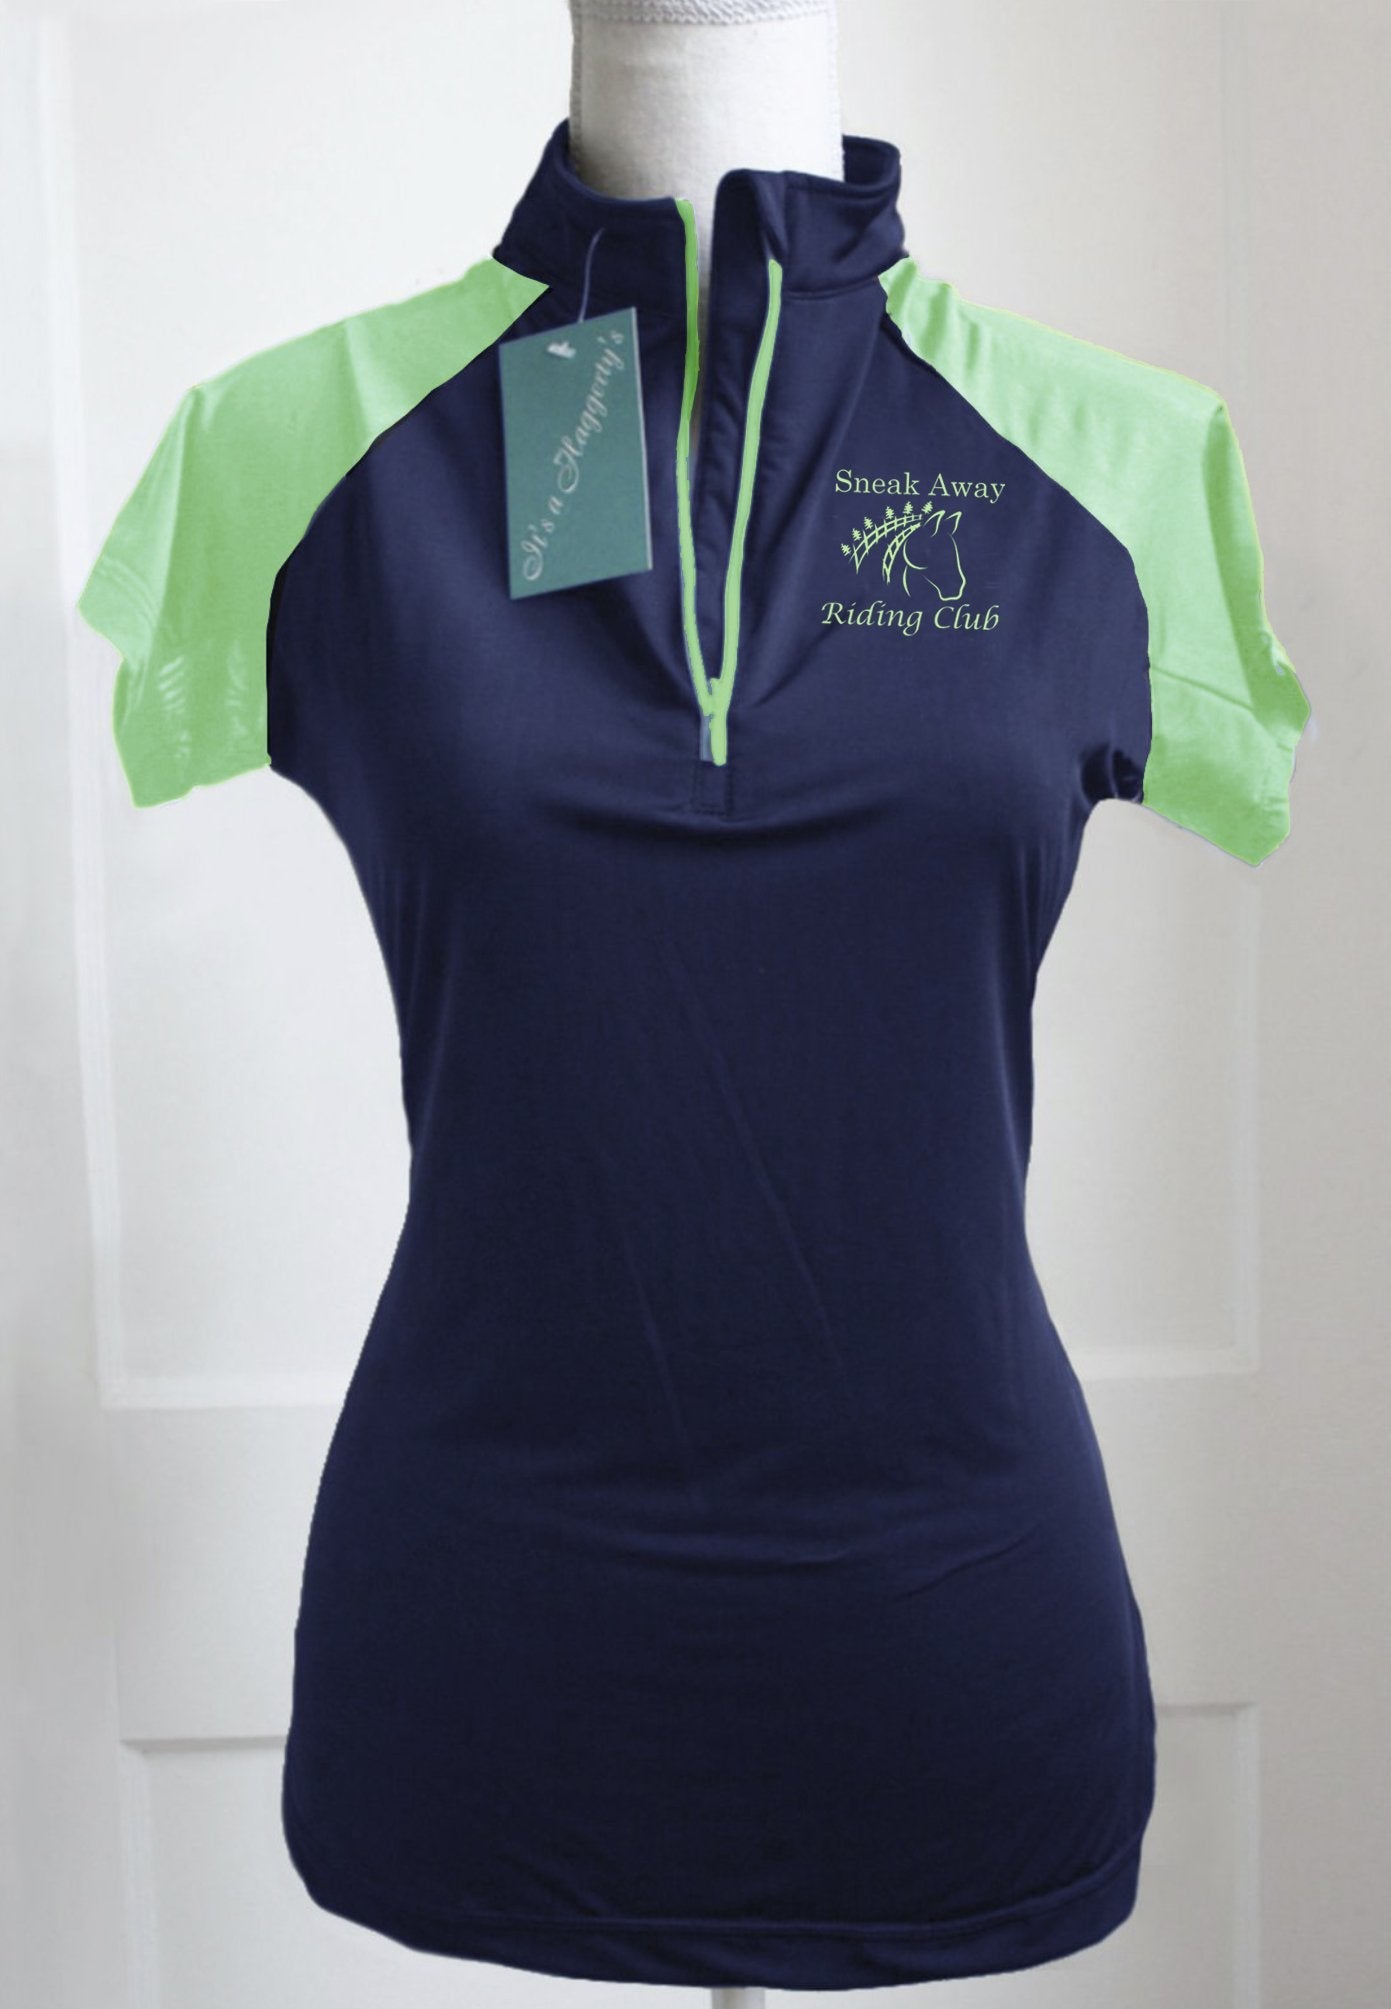 Sneak Away Riding Club YOUTH Custom Sun Shirt - Short Sleeve Navy with Lime Accents